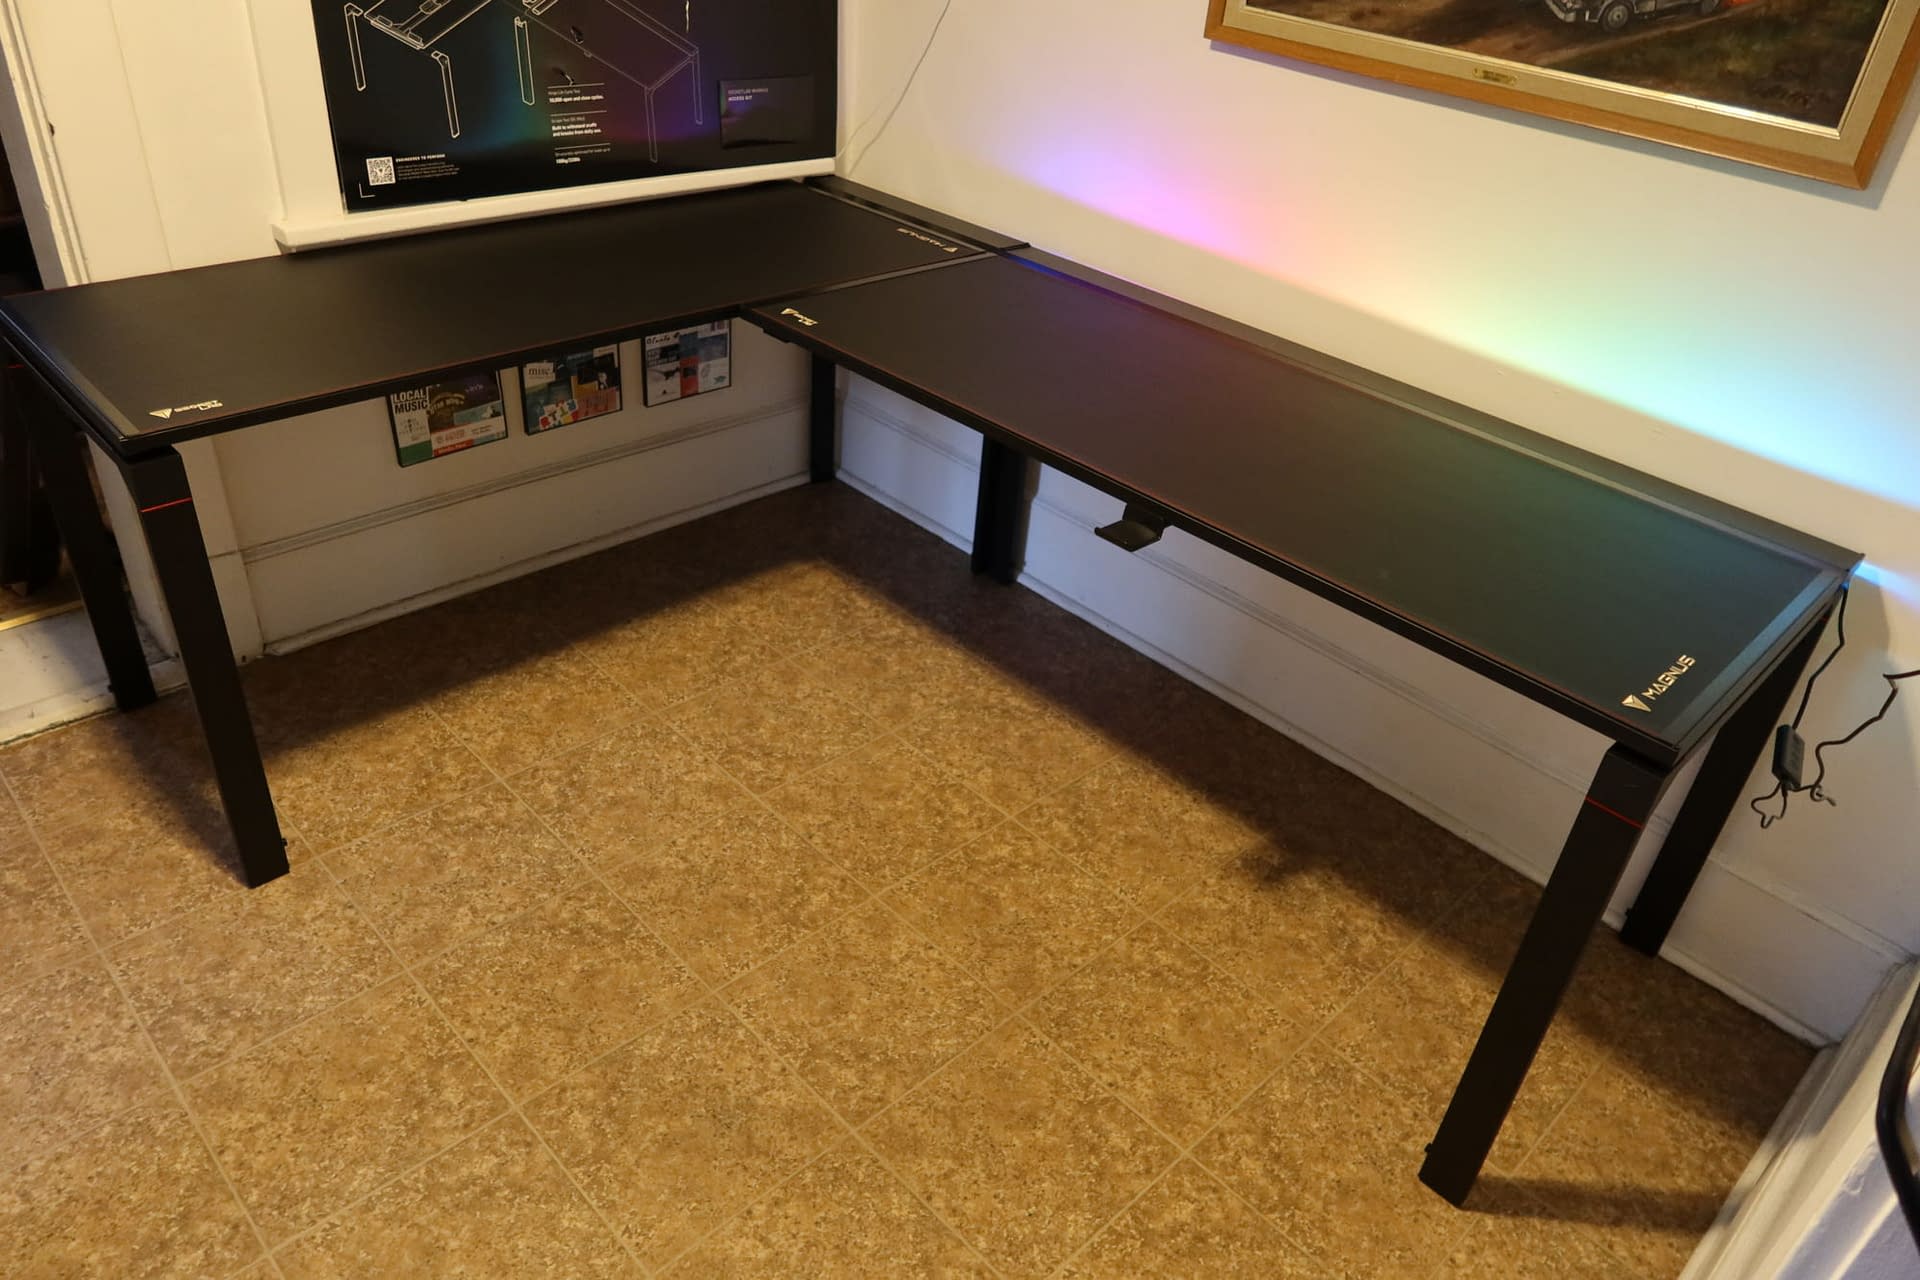 I tested the Secretlab's new gaming desk. Here's what I found